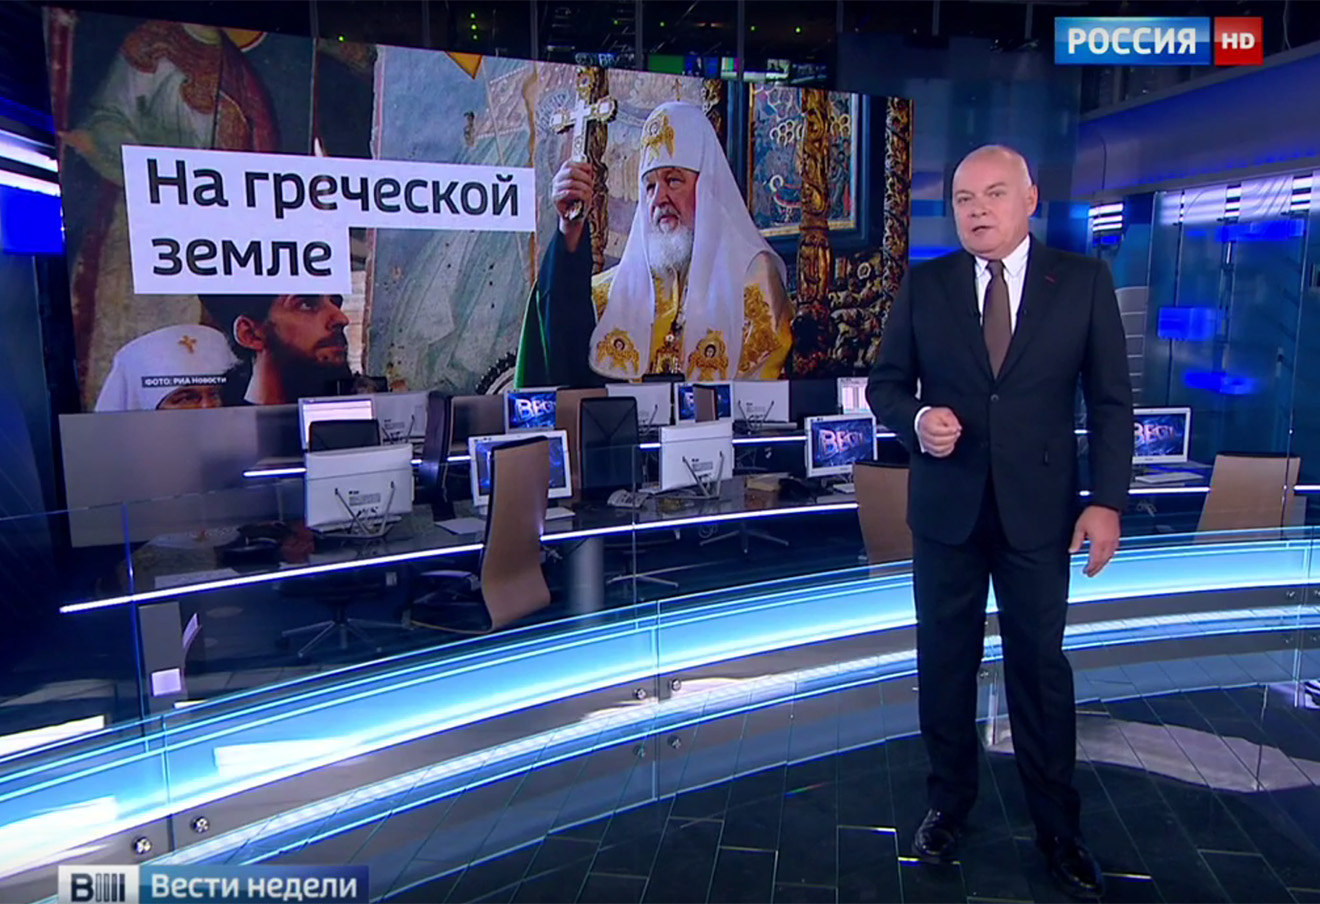 Dmitry Kiselyov, the head of the Kremlin's Russia Today (RT) news agency, a worldwide propaganda network to promote the Kremlin's policies, disparage homosexuality, denigrate the West and invent Western-led conspiracy theories as well as attack the political opposition to Putin. (Image: screen capture)